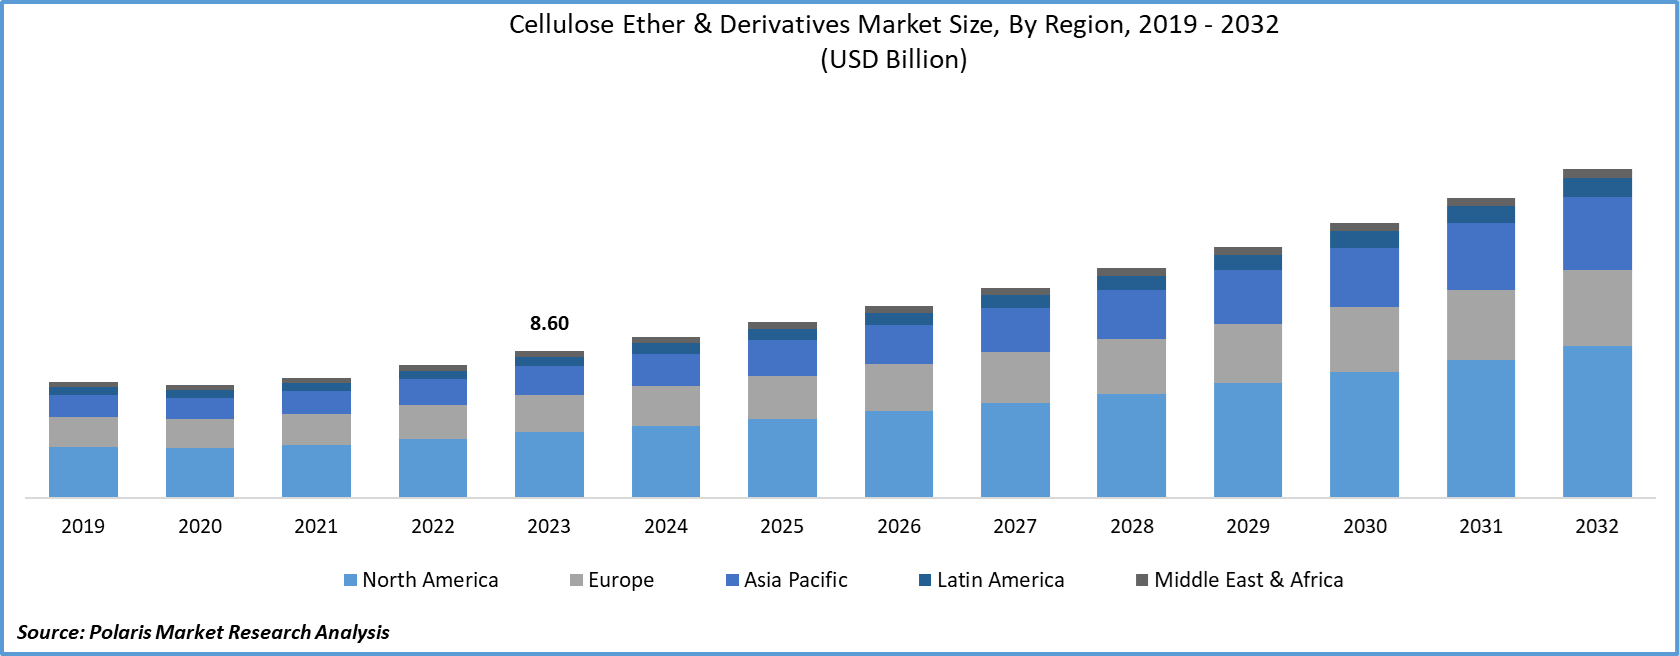 Cellulose Ether & Derivatives Market Size